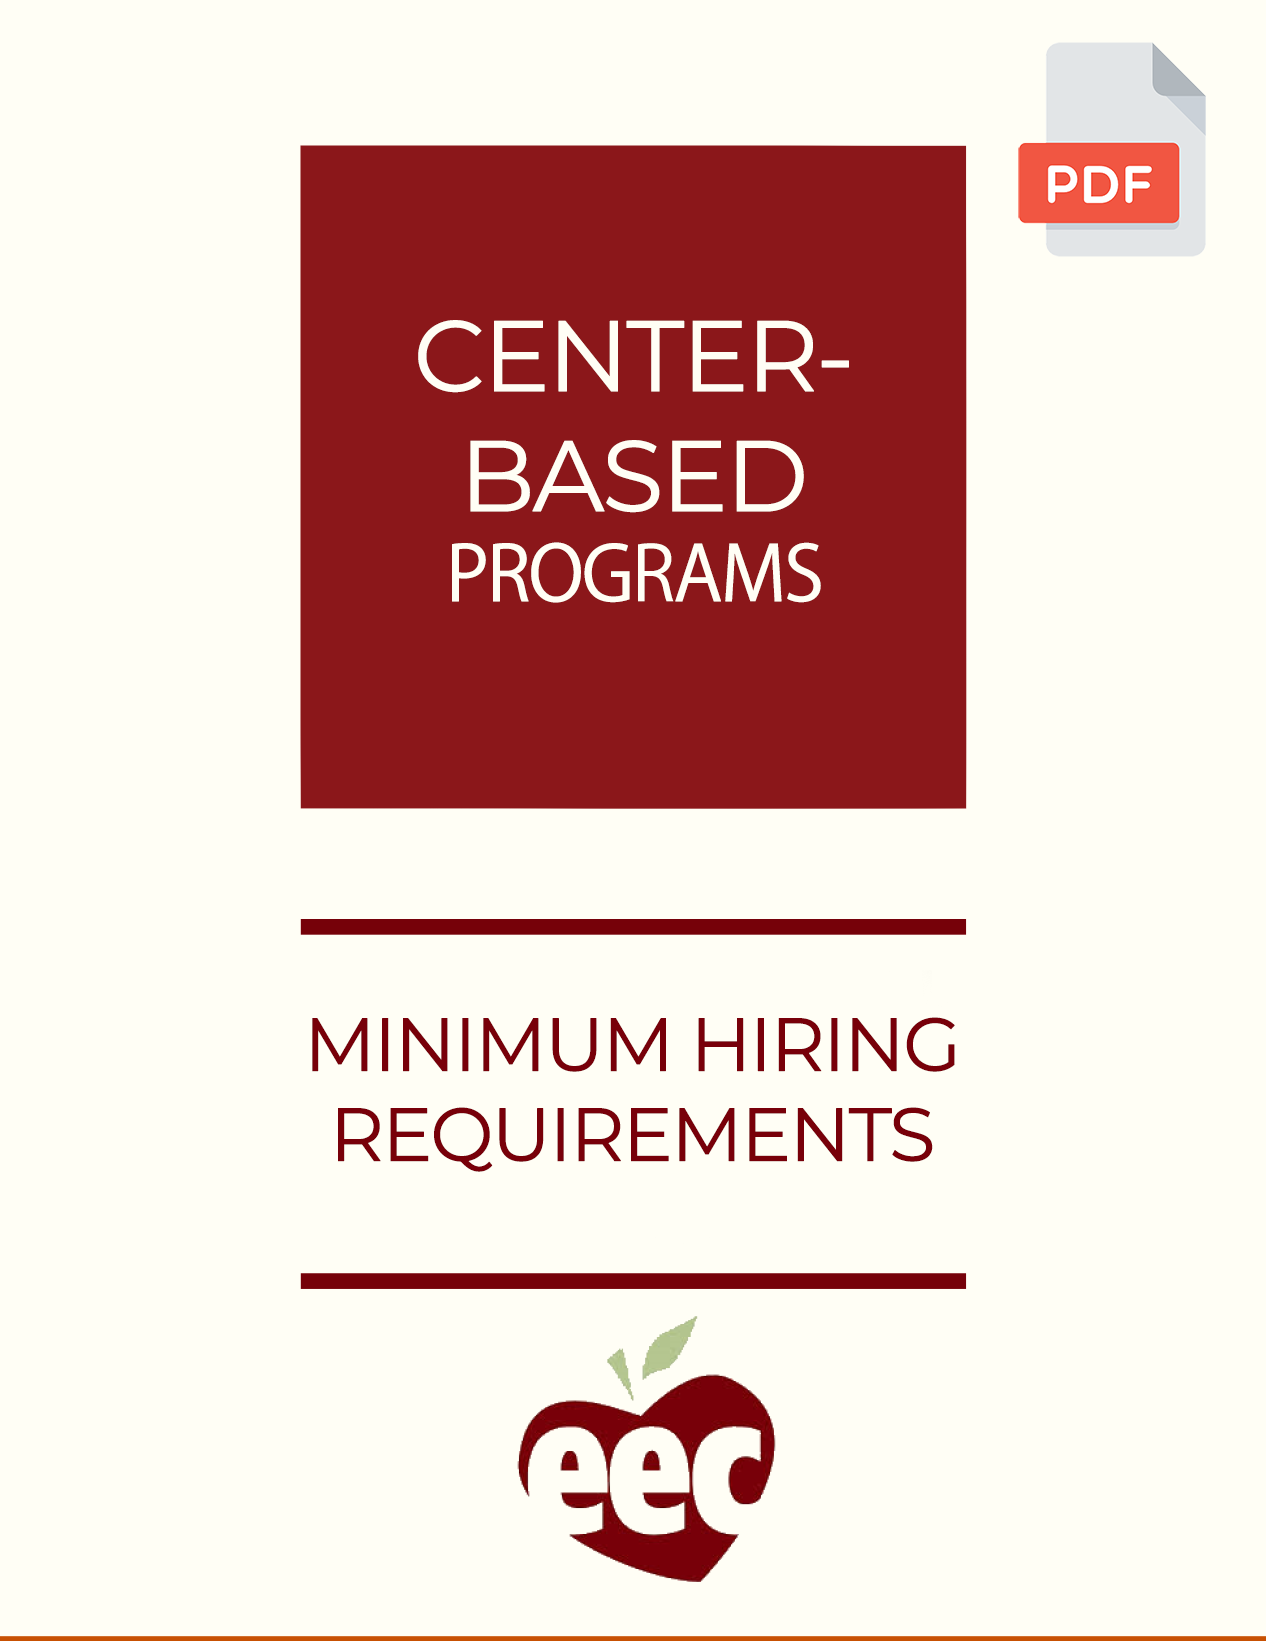 Select to open the Minimum Hiring Requirements checklist for Center-Based Programs